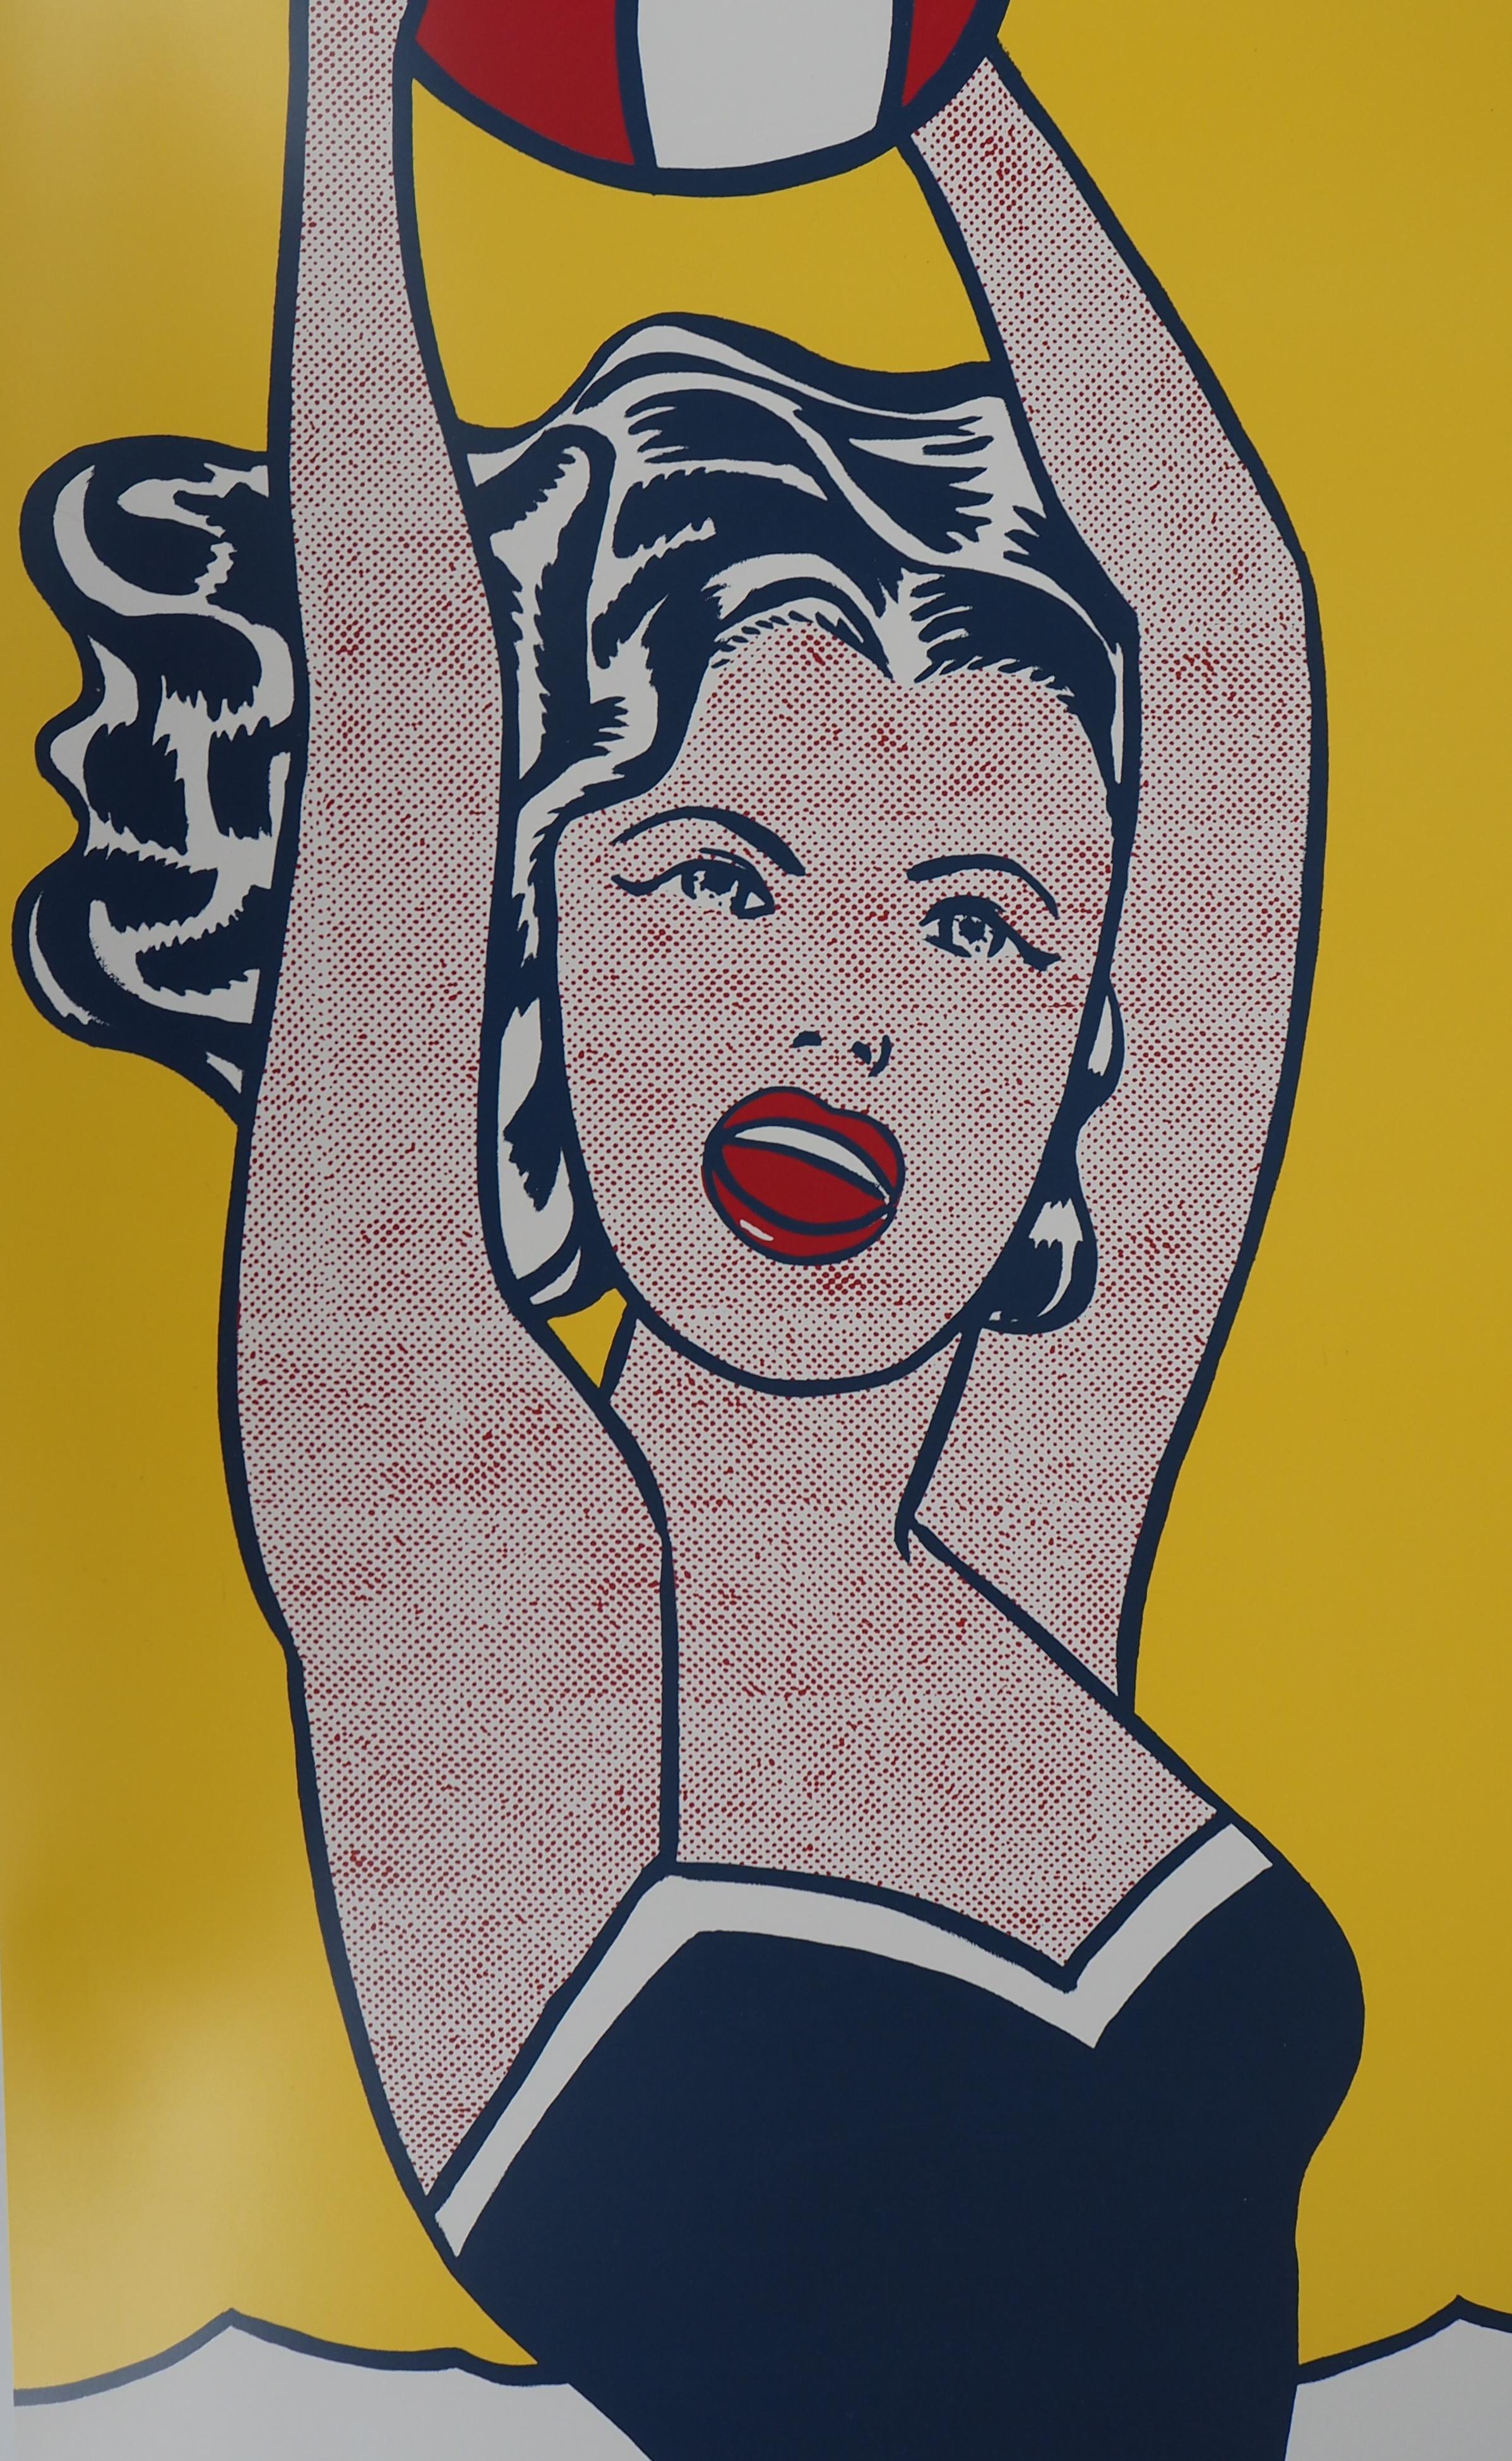 Woman with Red Ball - Original vintage poster, Bruxelles 1995 - Brown Figurative Print by (after) Roy Lichtenstein